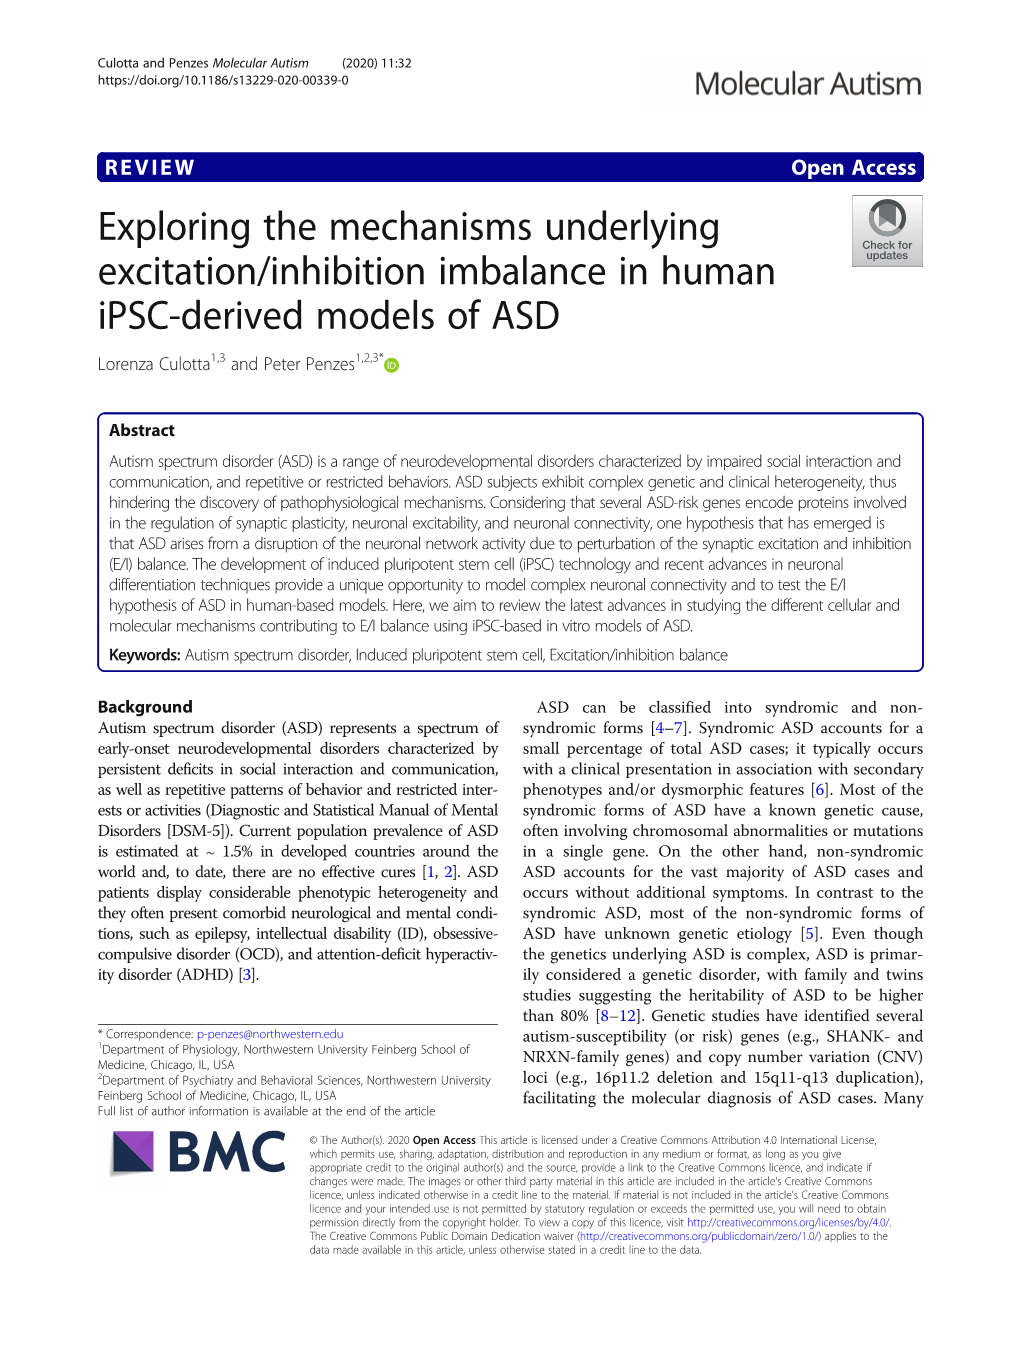 Exploring the Mechanisms Underlying Excitation/Inhibition Imbalance in Human Ipsc-Derived Models of ASD Lorenza Culotta1,3 and Peter Penzes1,2,3*